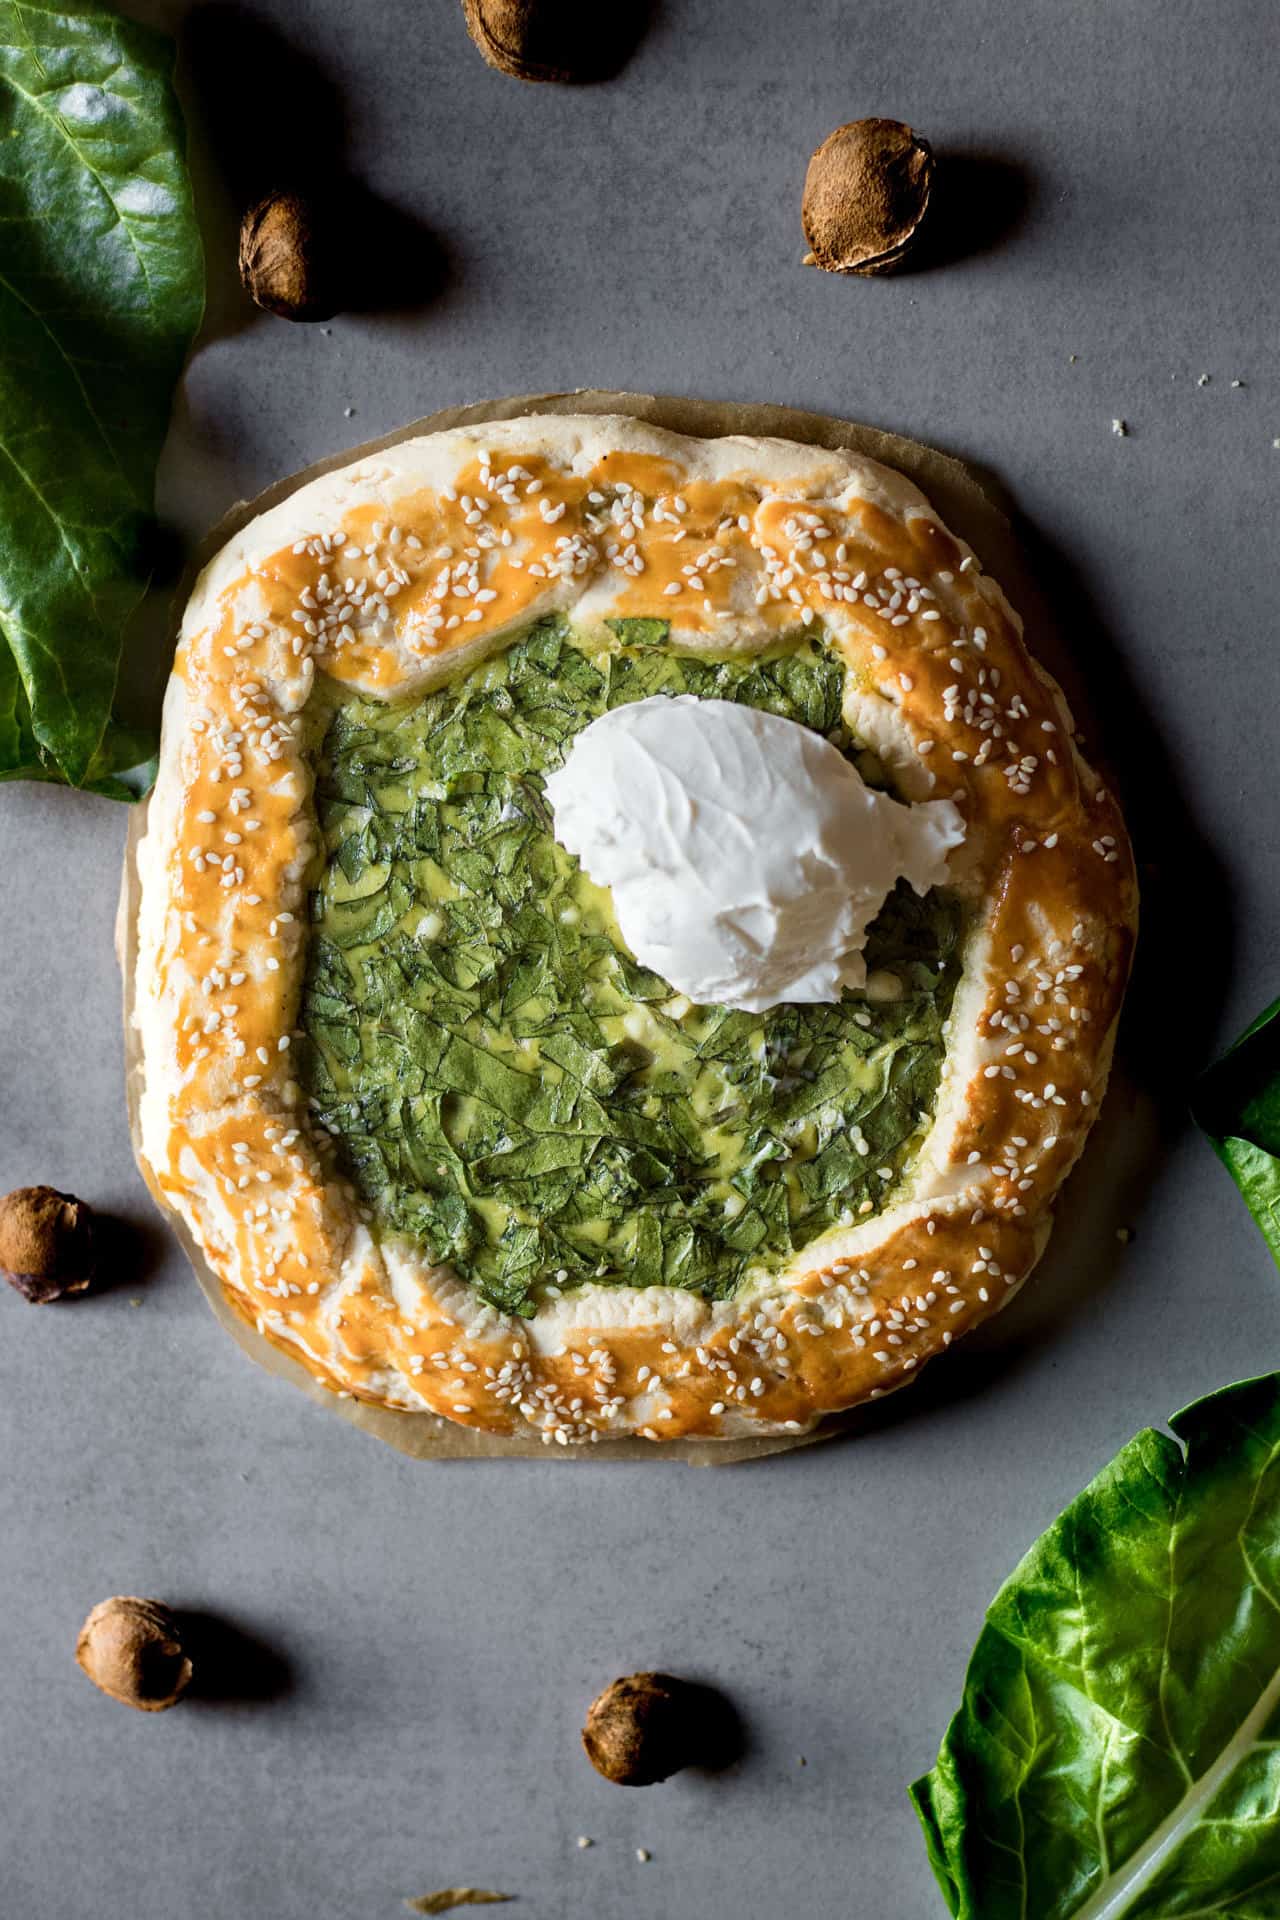 This Gluten-Free Galette With Chard and Feta is low FODMAP, healthy, flavorful, delicious with a super flaky texture. Plus super simple and easy to make!